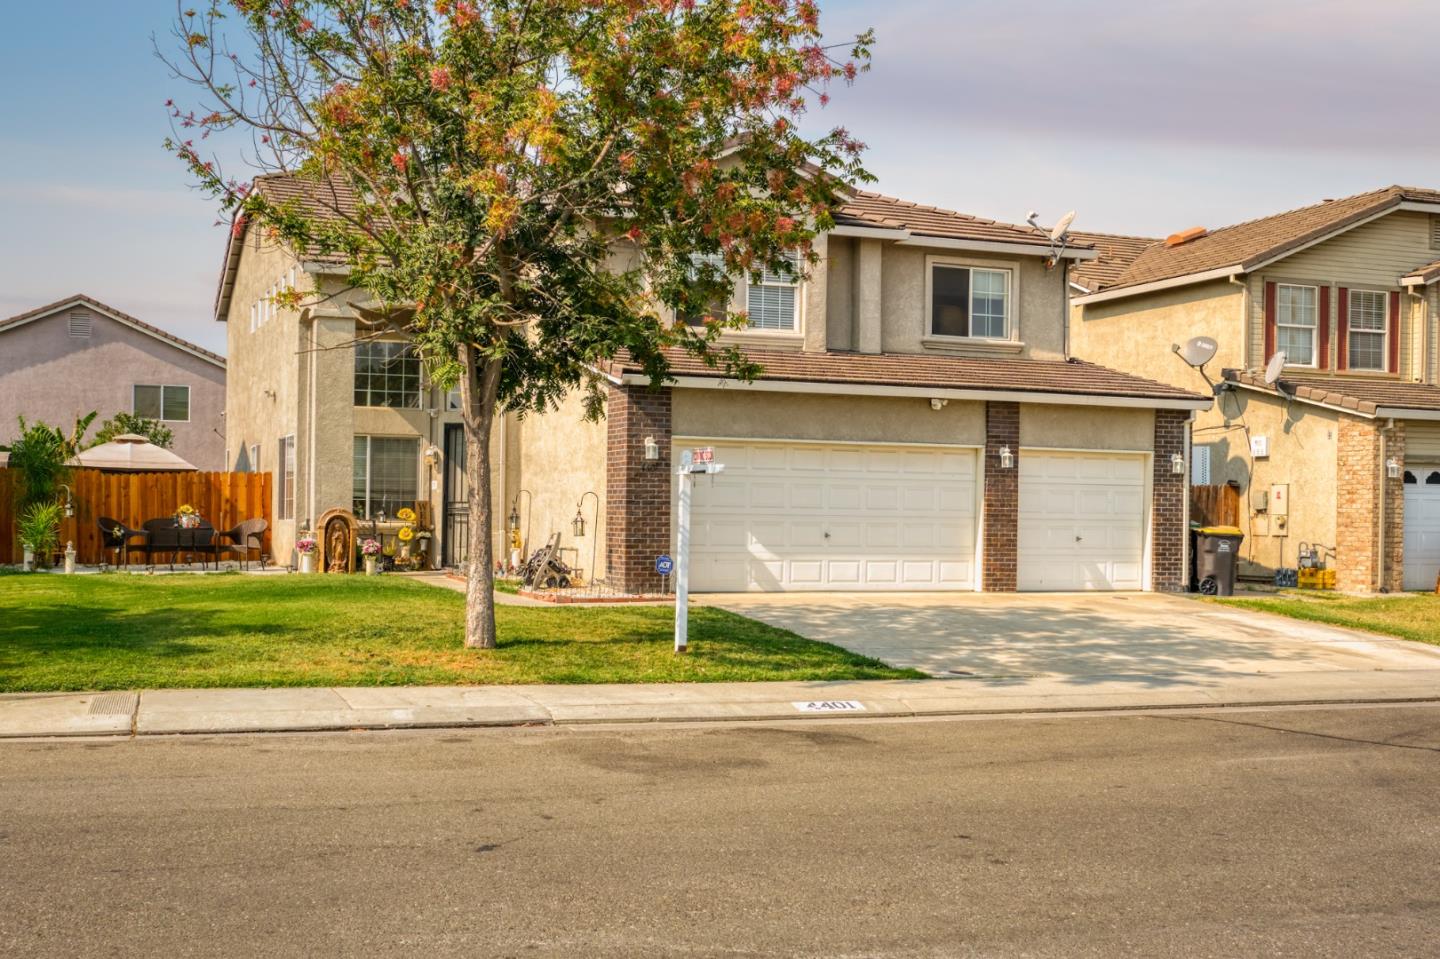 Photo of 4401 Giselle Ln in Stockton, CA